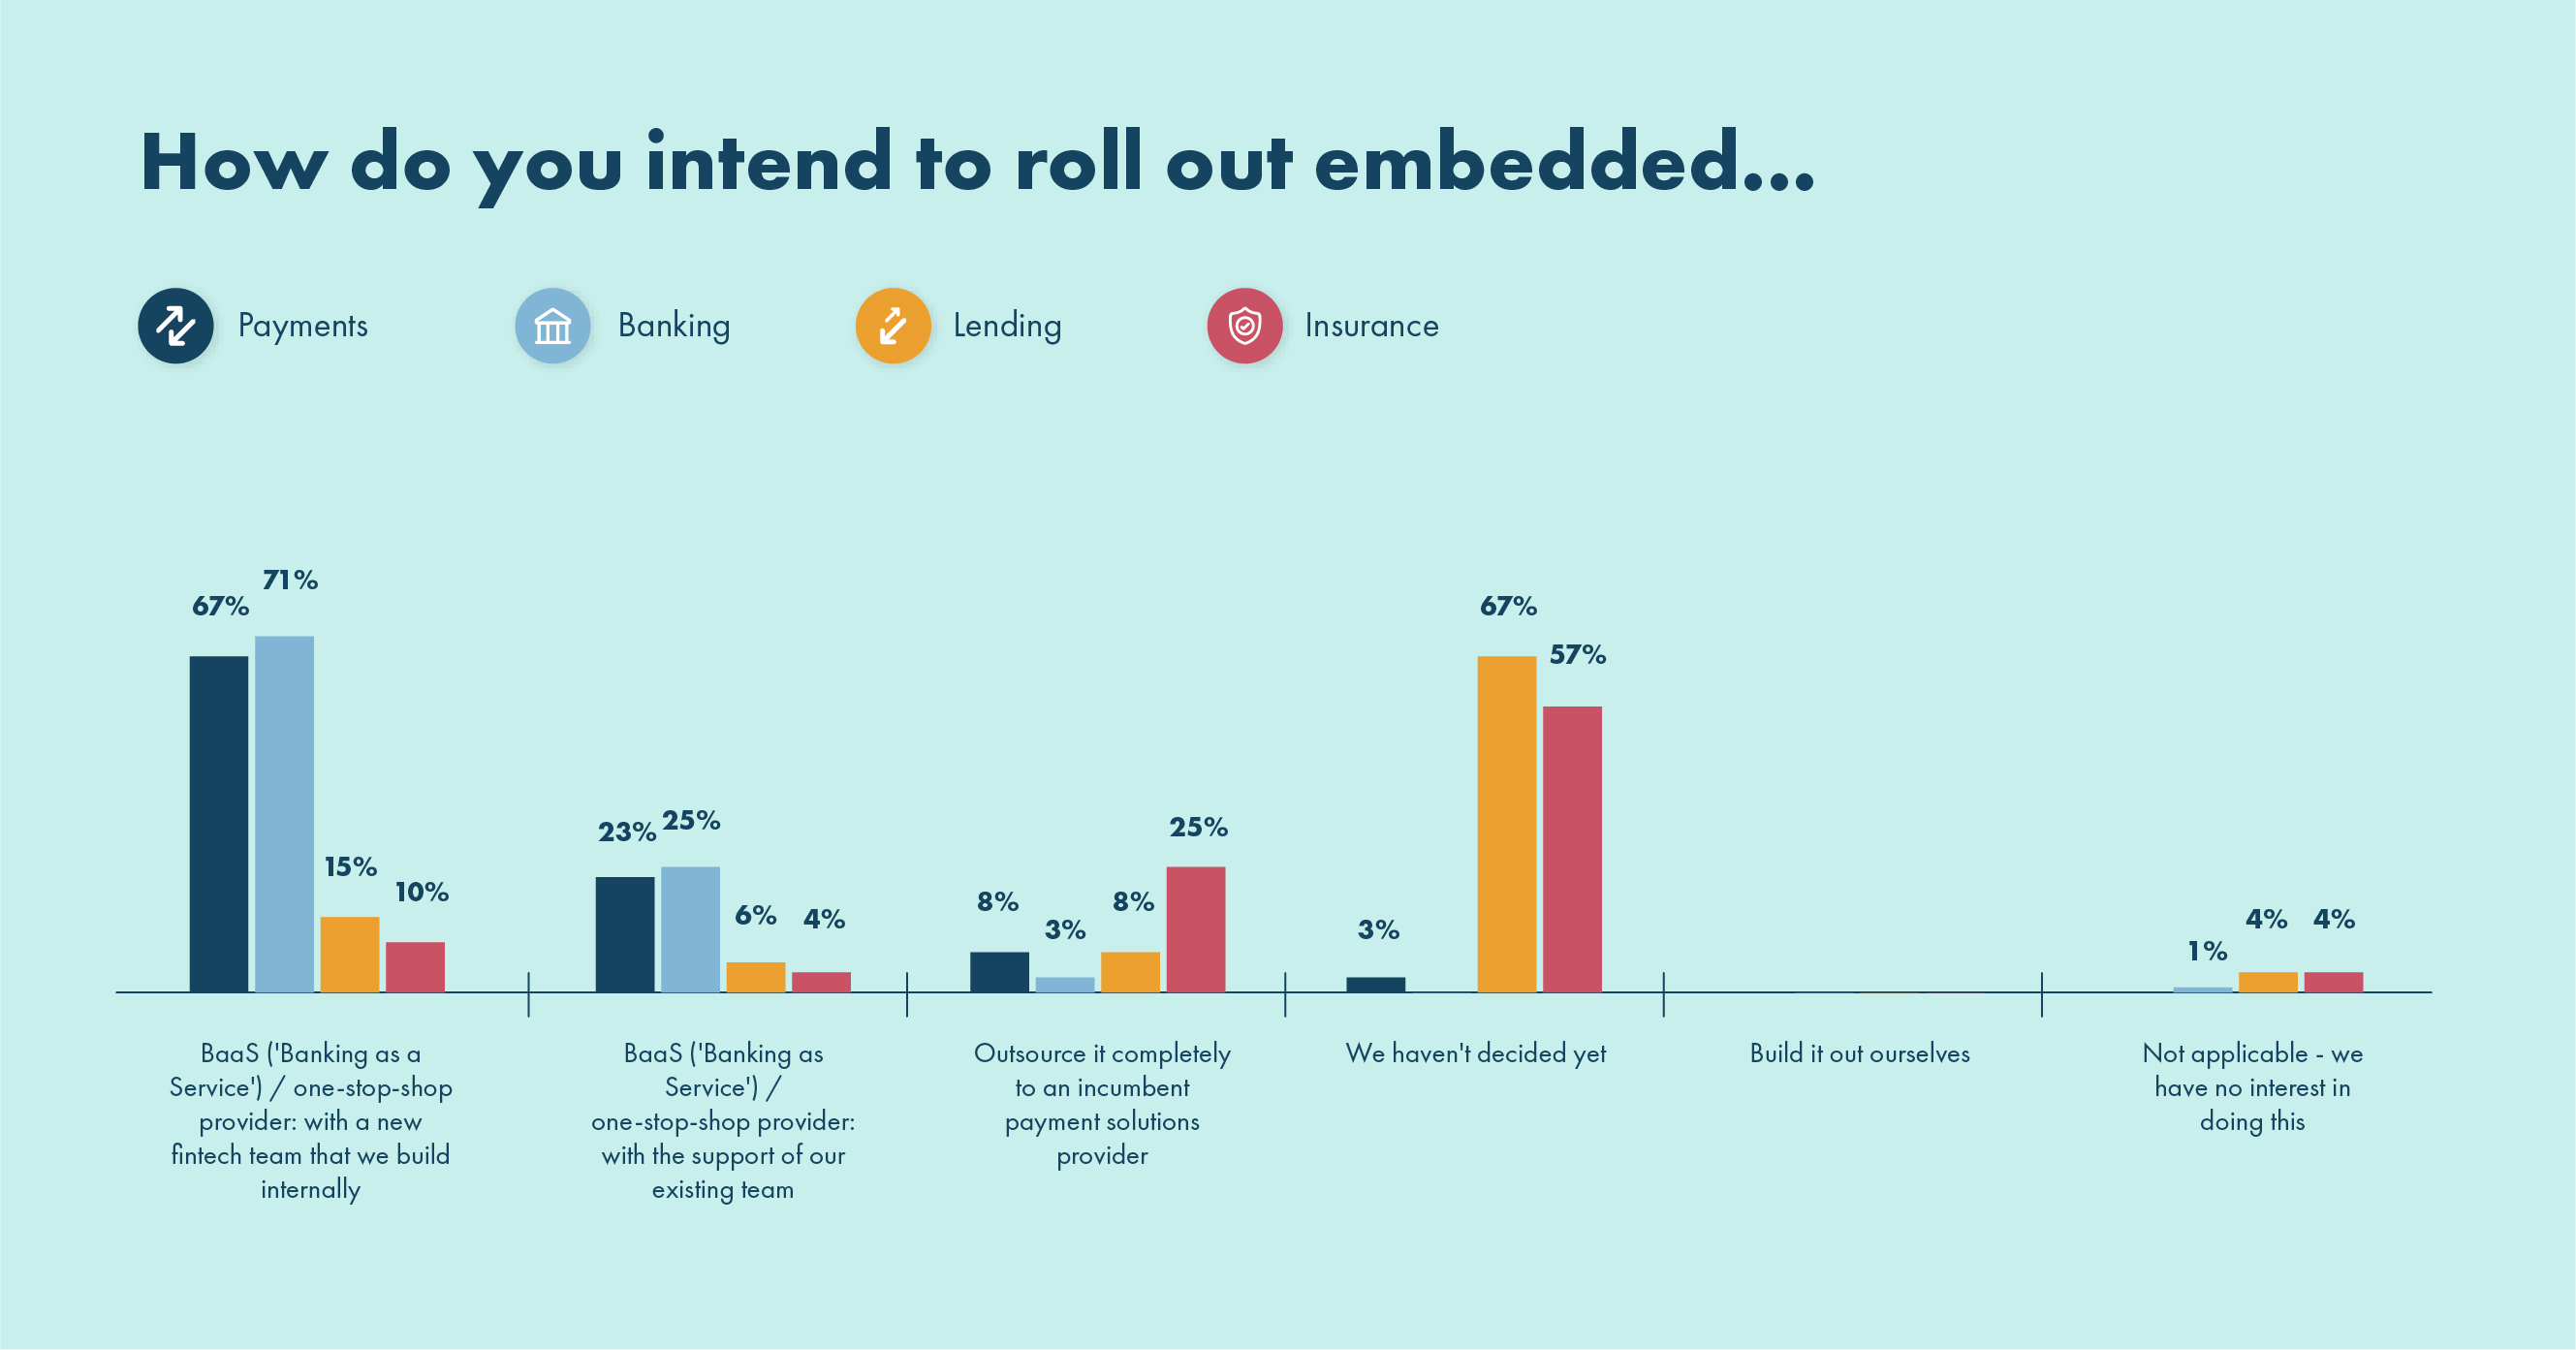 How do you intend to roll out embedded payments, embedded banking, embedded lending, embedded insurance 